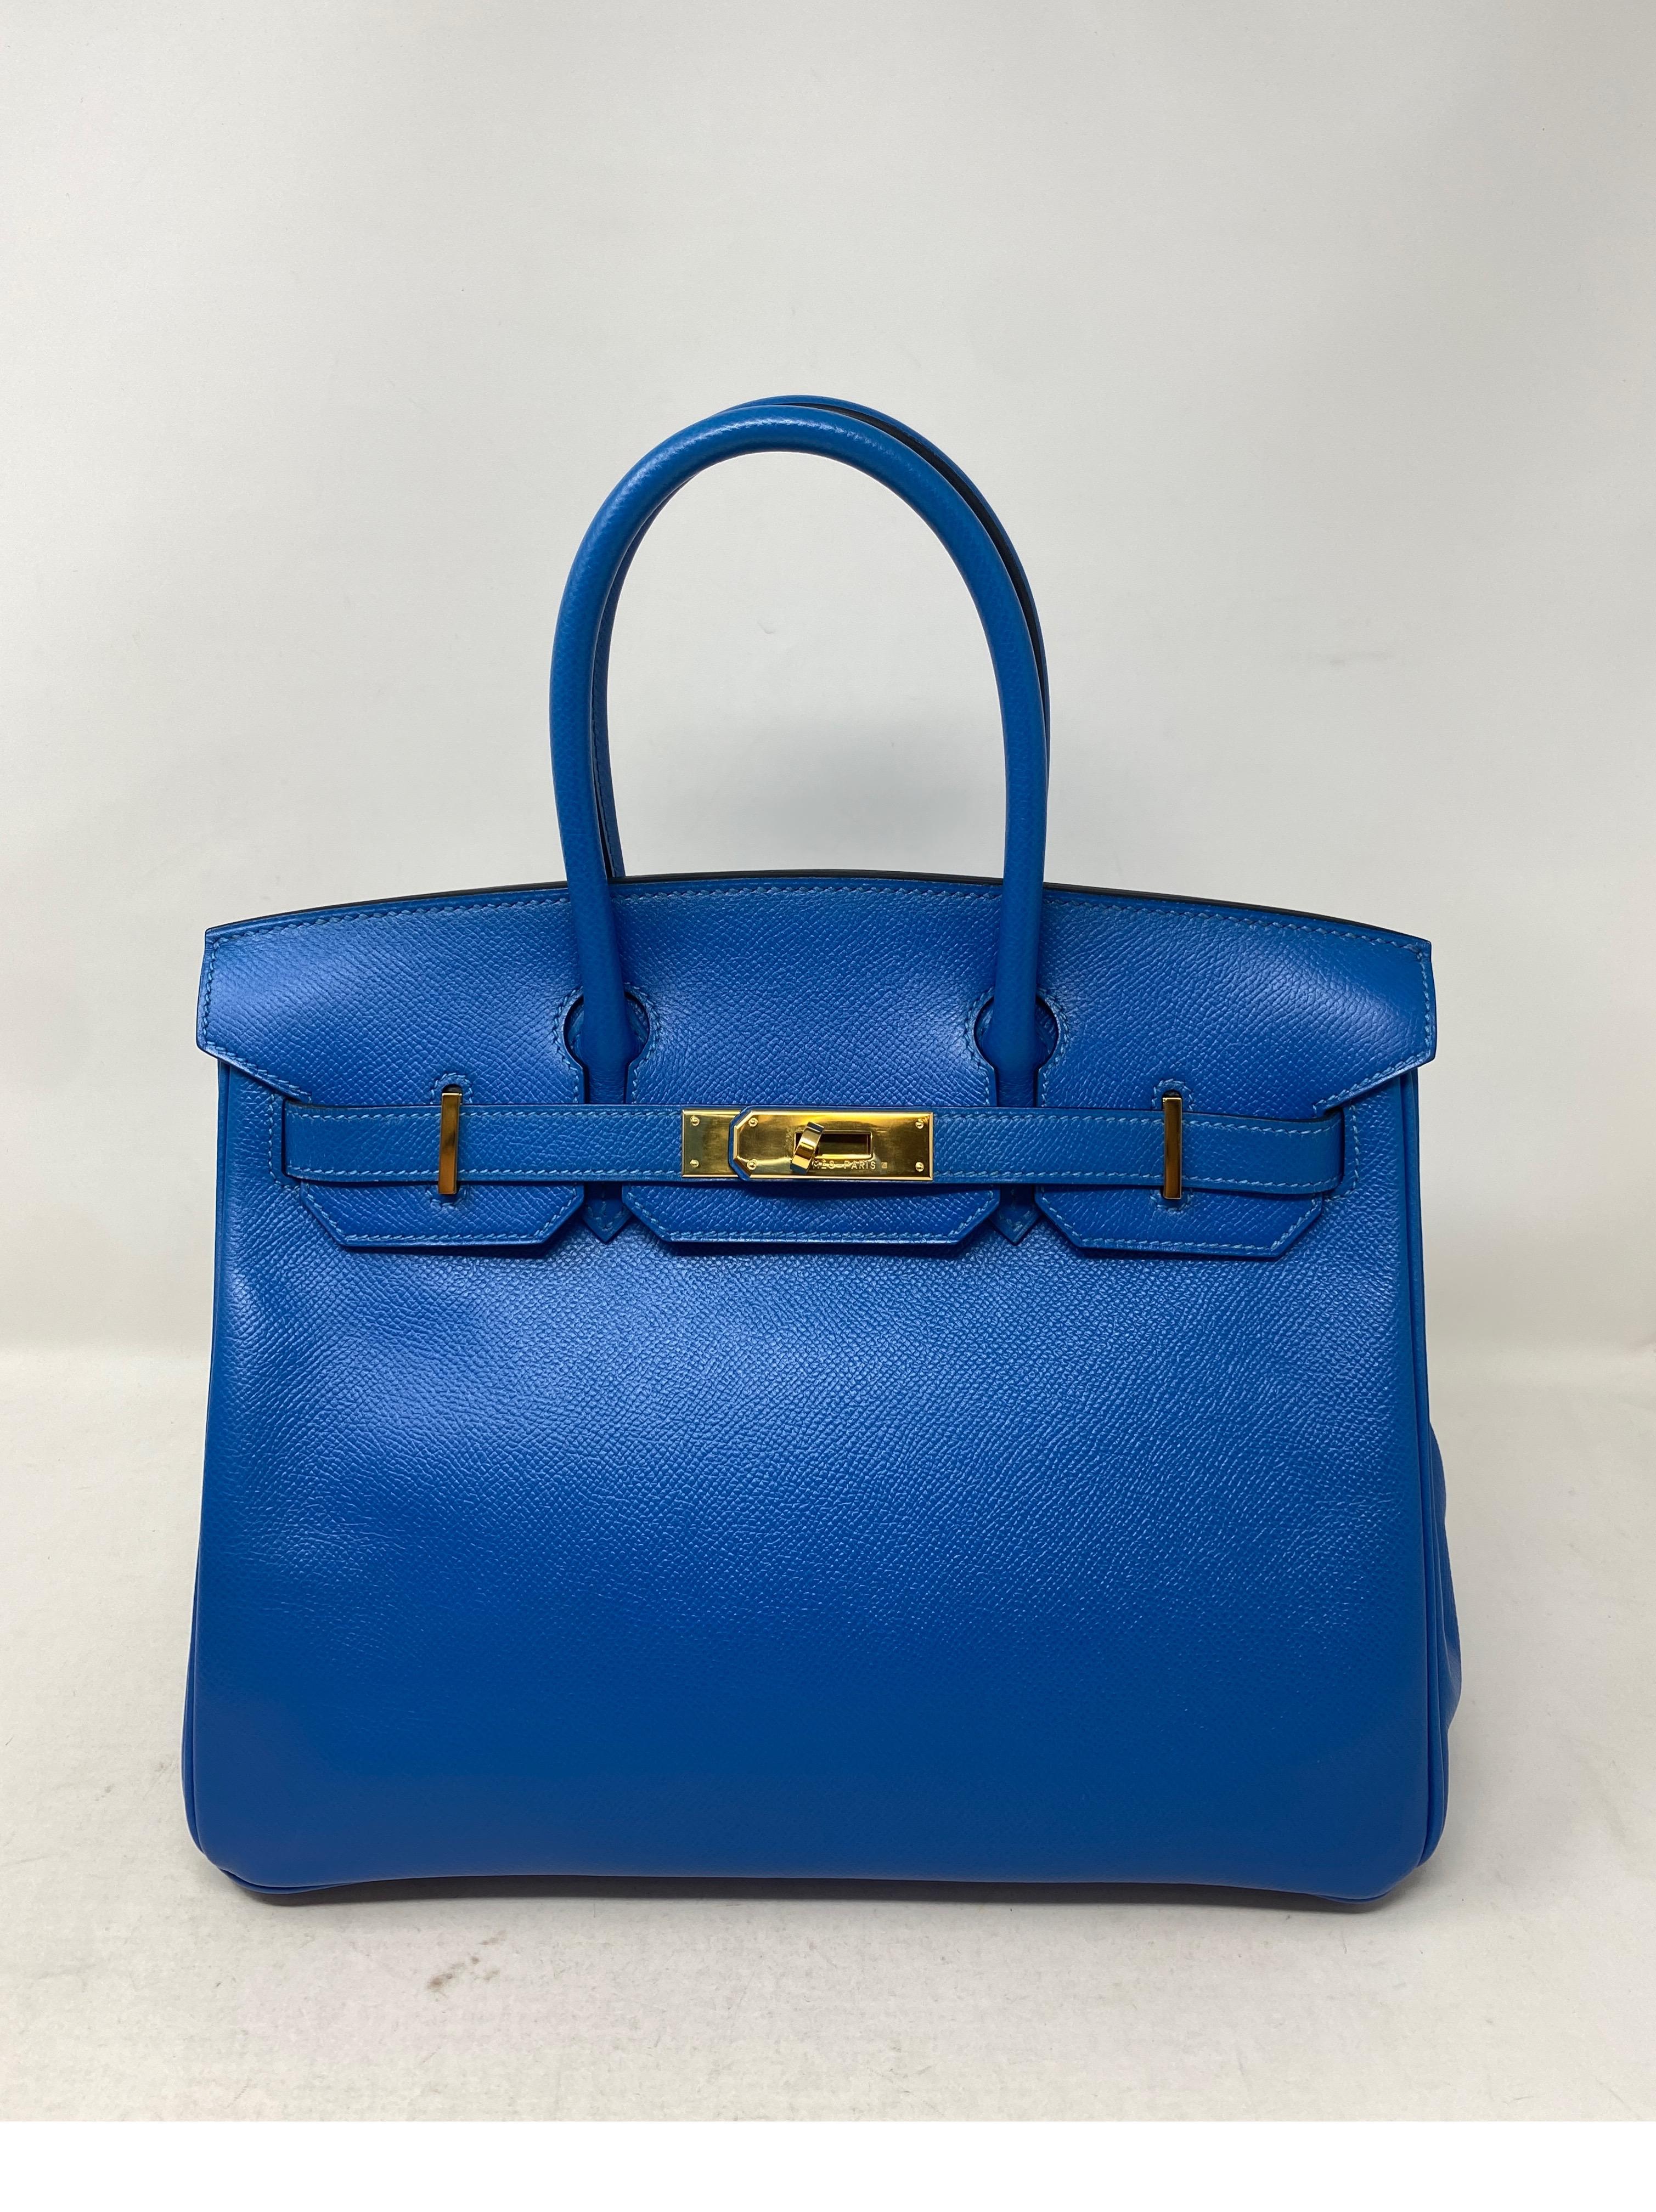 Hermes Blue France Birkin 30 Bag. Beautiful color. Gold hardware. Epsom leather. Excellent condition. Rare color and size. Includes clochette, lock, keys, and dust cover. Guaranteed authentic. 